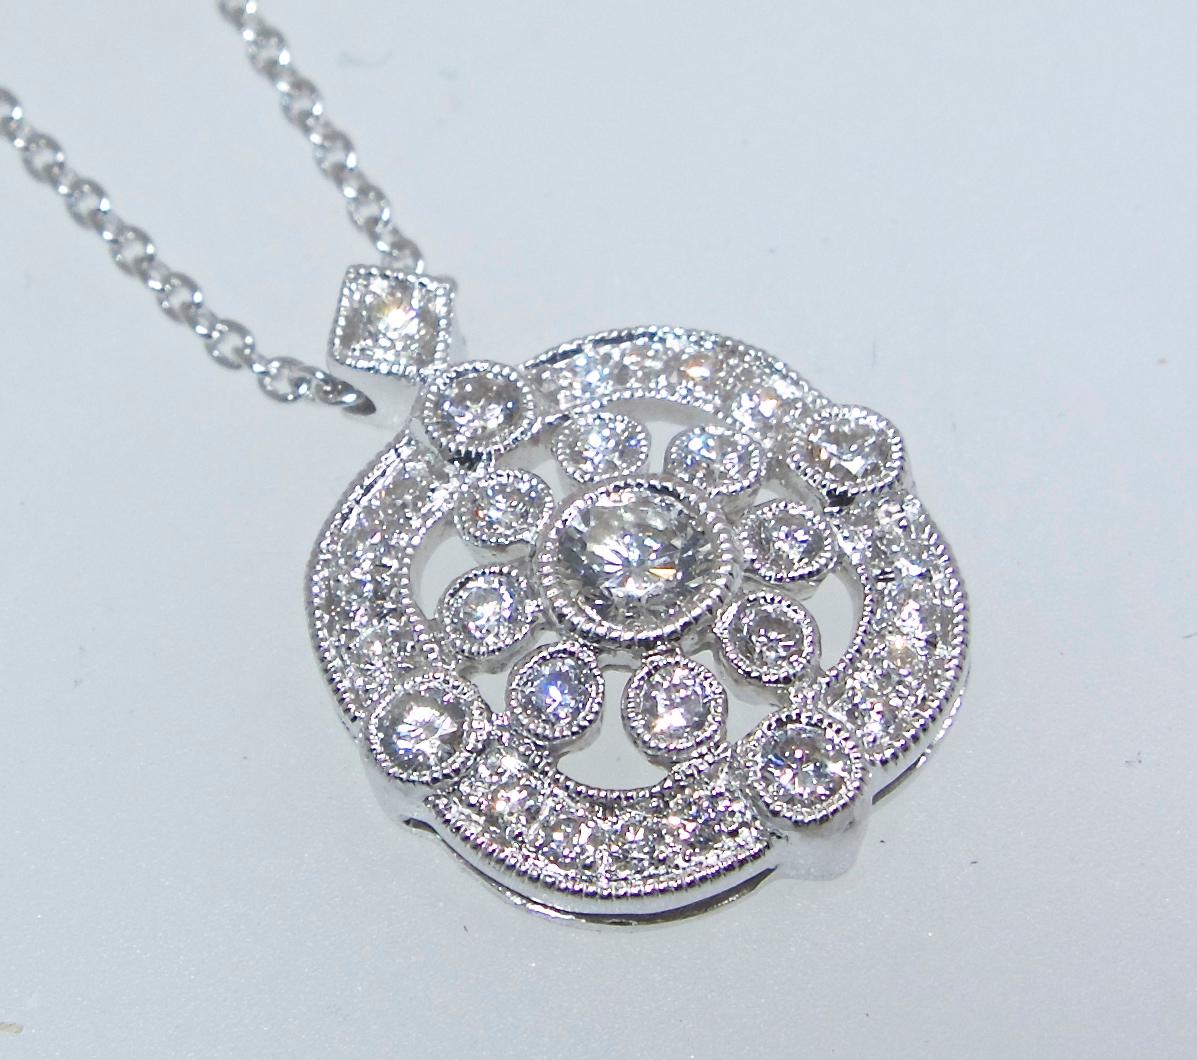 The diamond encrusted pendant is well made and a sparkling statement for the neck.  It is well made with .65 cts of fine white diamonds - all well cut and well matched, near colorless (H) and very slightly included (VS).  This pendant is .5 inches